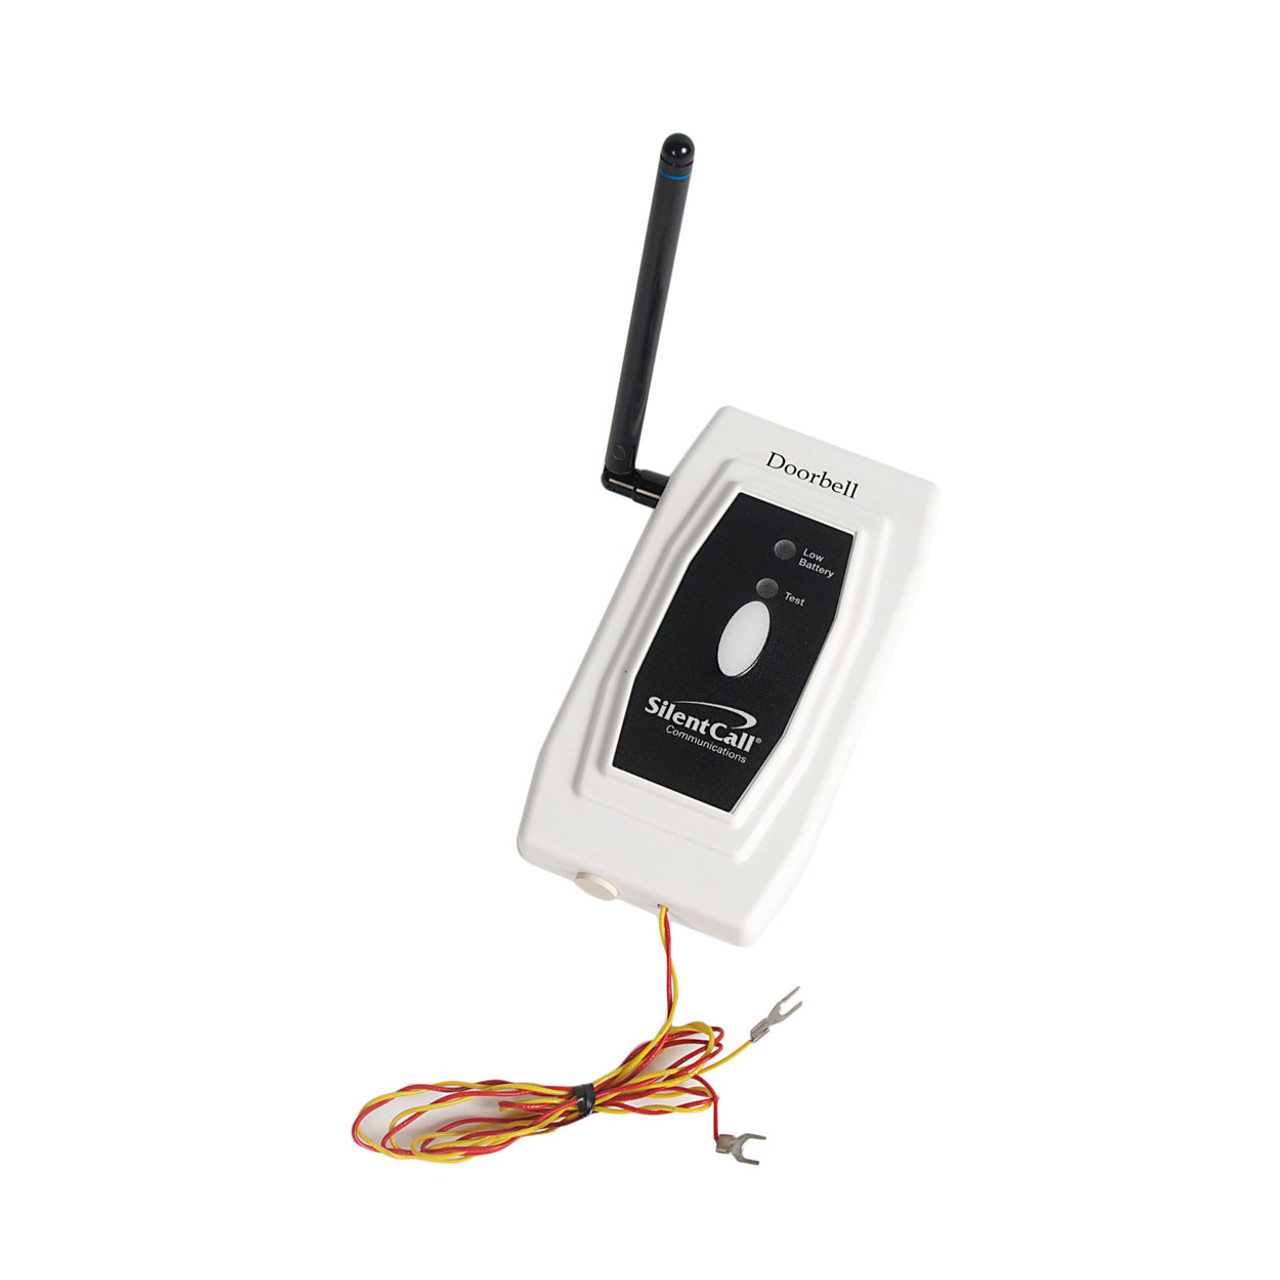 Silent Call Medallion Doorbell Transmitter Direct Wired No Battery